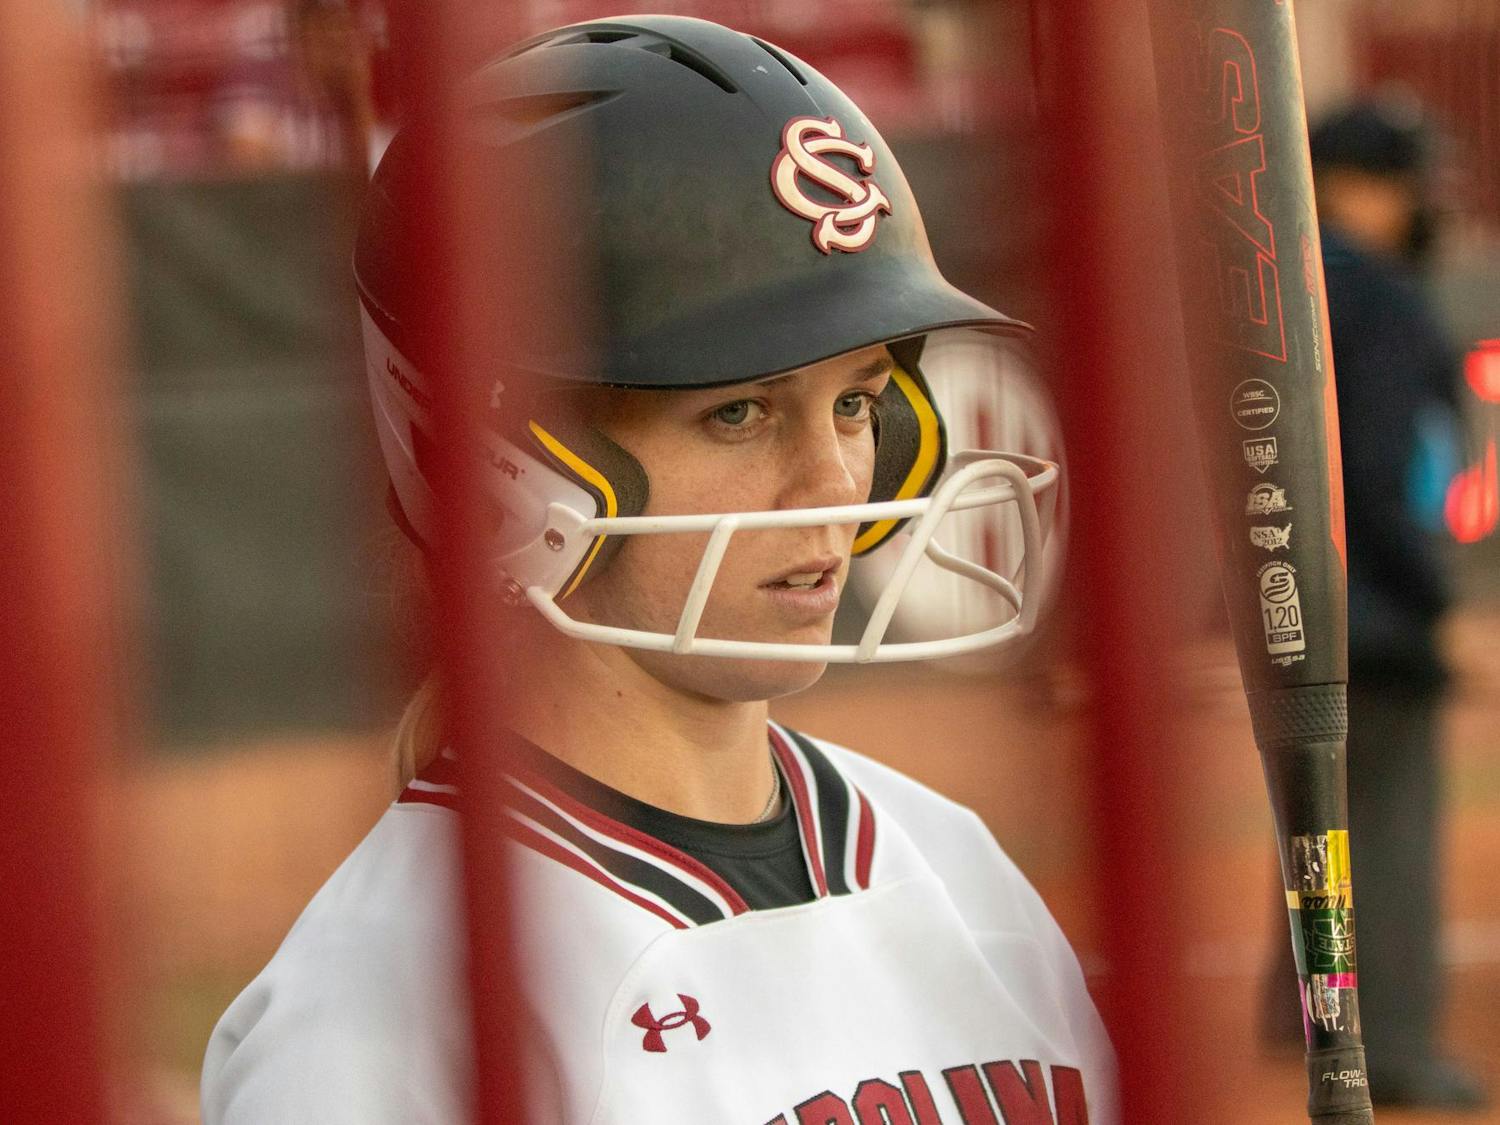 Senior infielder Riley Blampied looks to the dugout before an at-bat during South Carolina's game against Mississippi State on April 5, 2024. Blampied earned one hit in three at-bats during the Gamecocks' 6-0 loss to the Bulldogs.